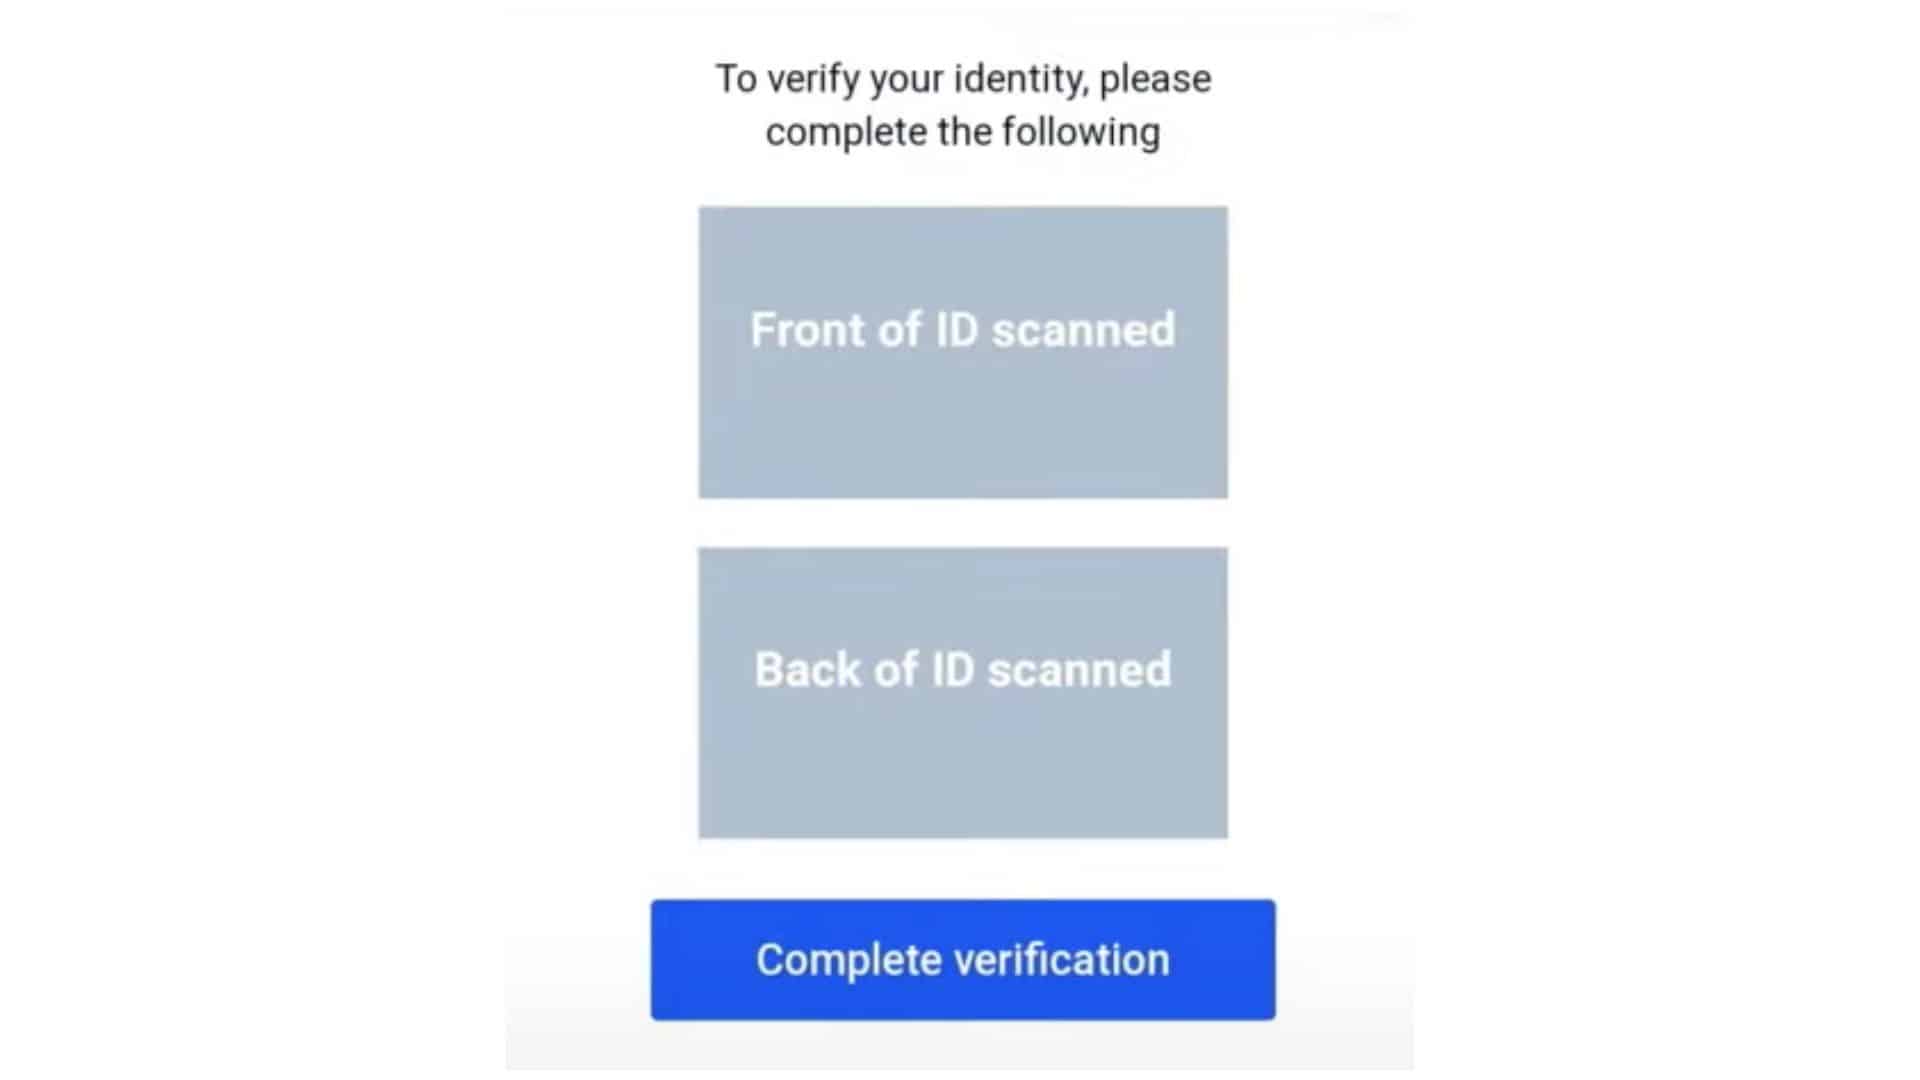 coinbase asks for id